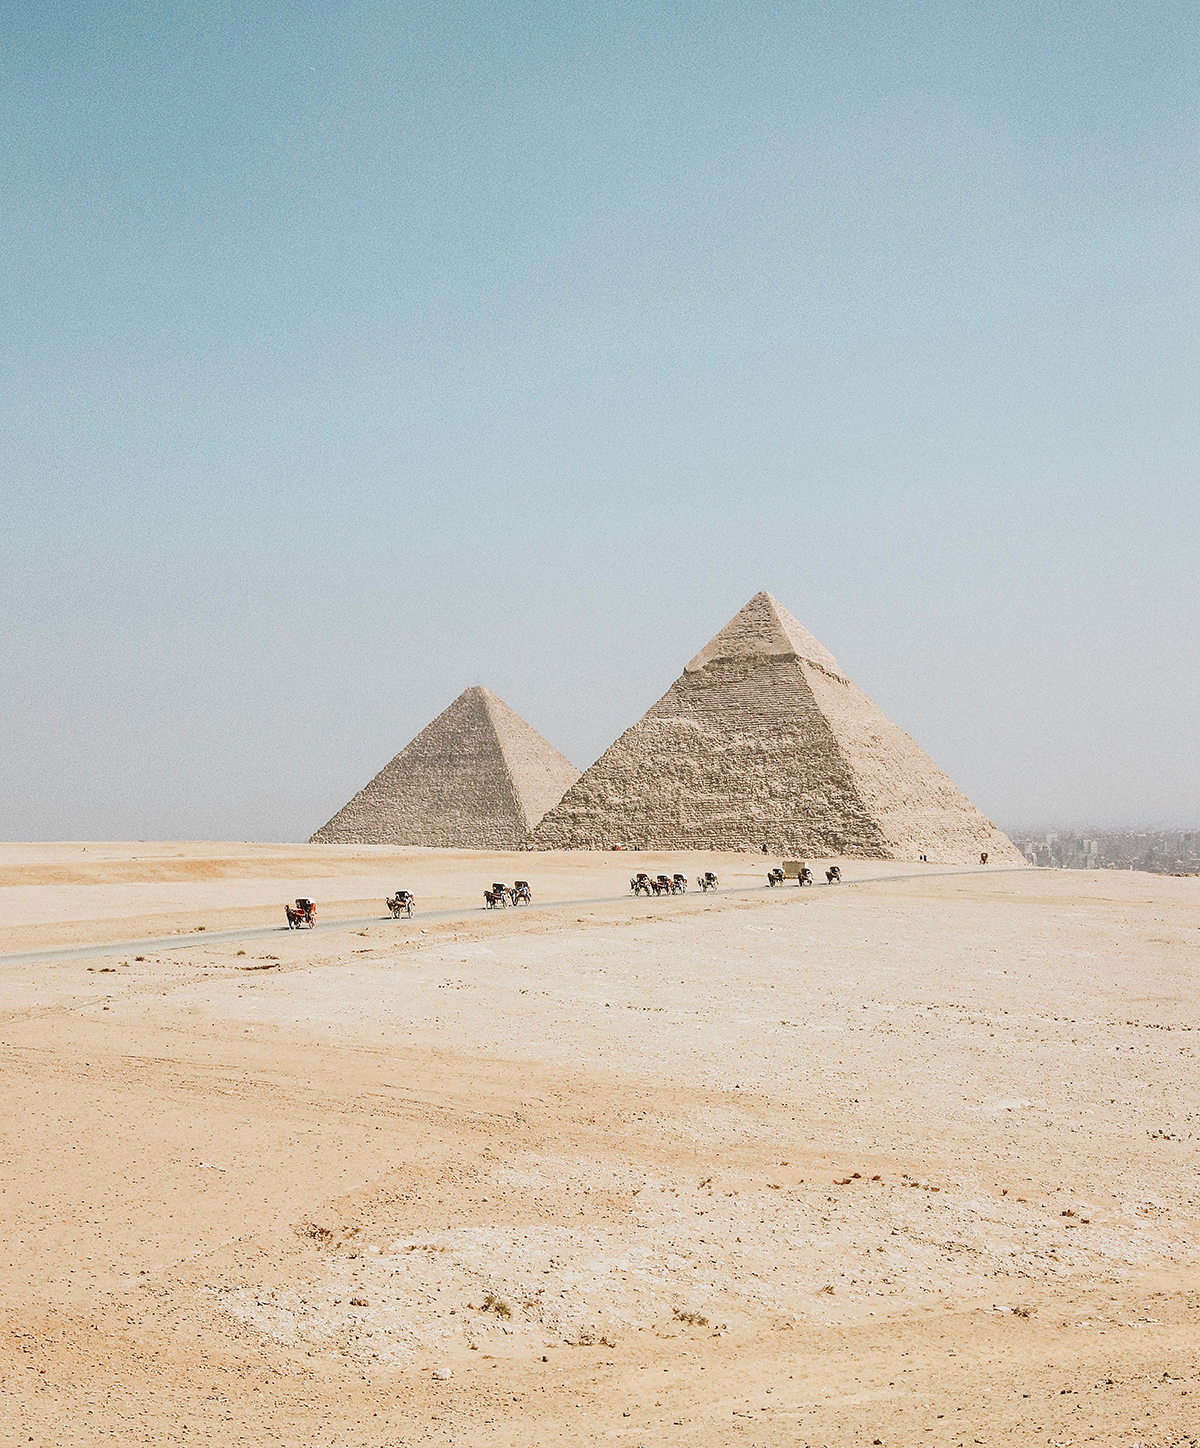 Egyptian pyramids with camel trail